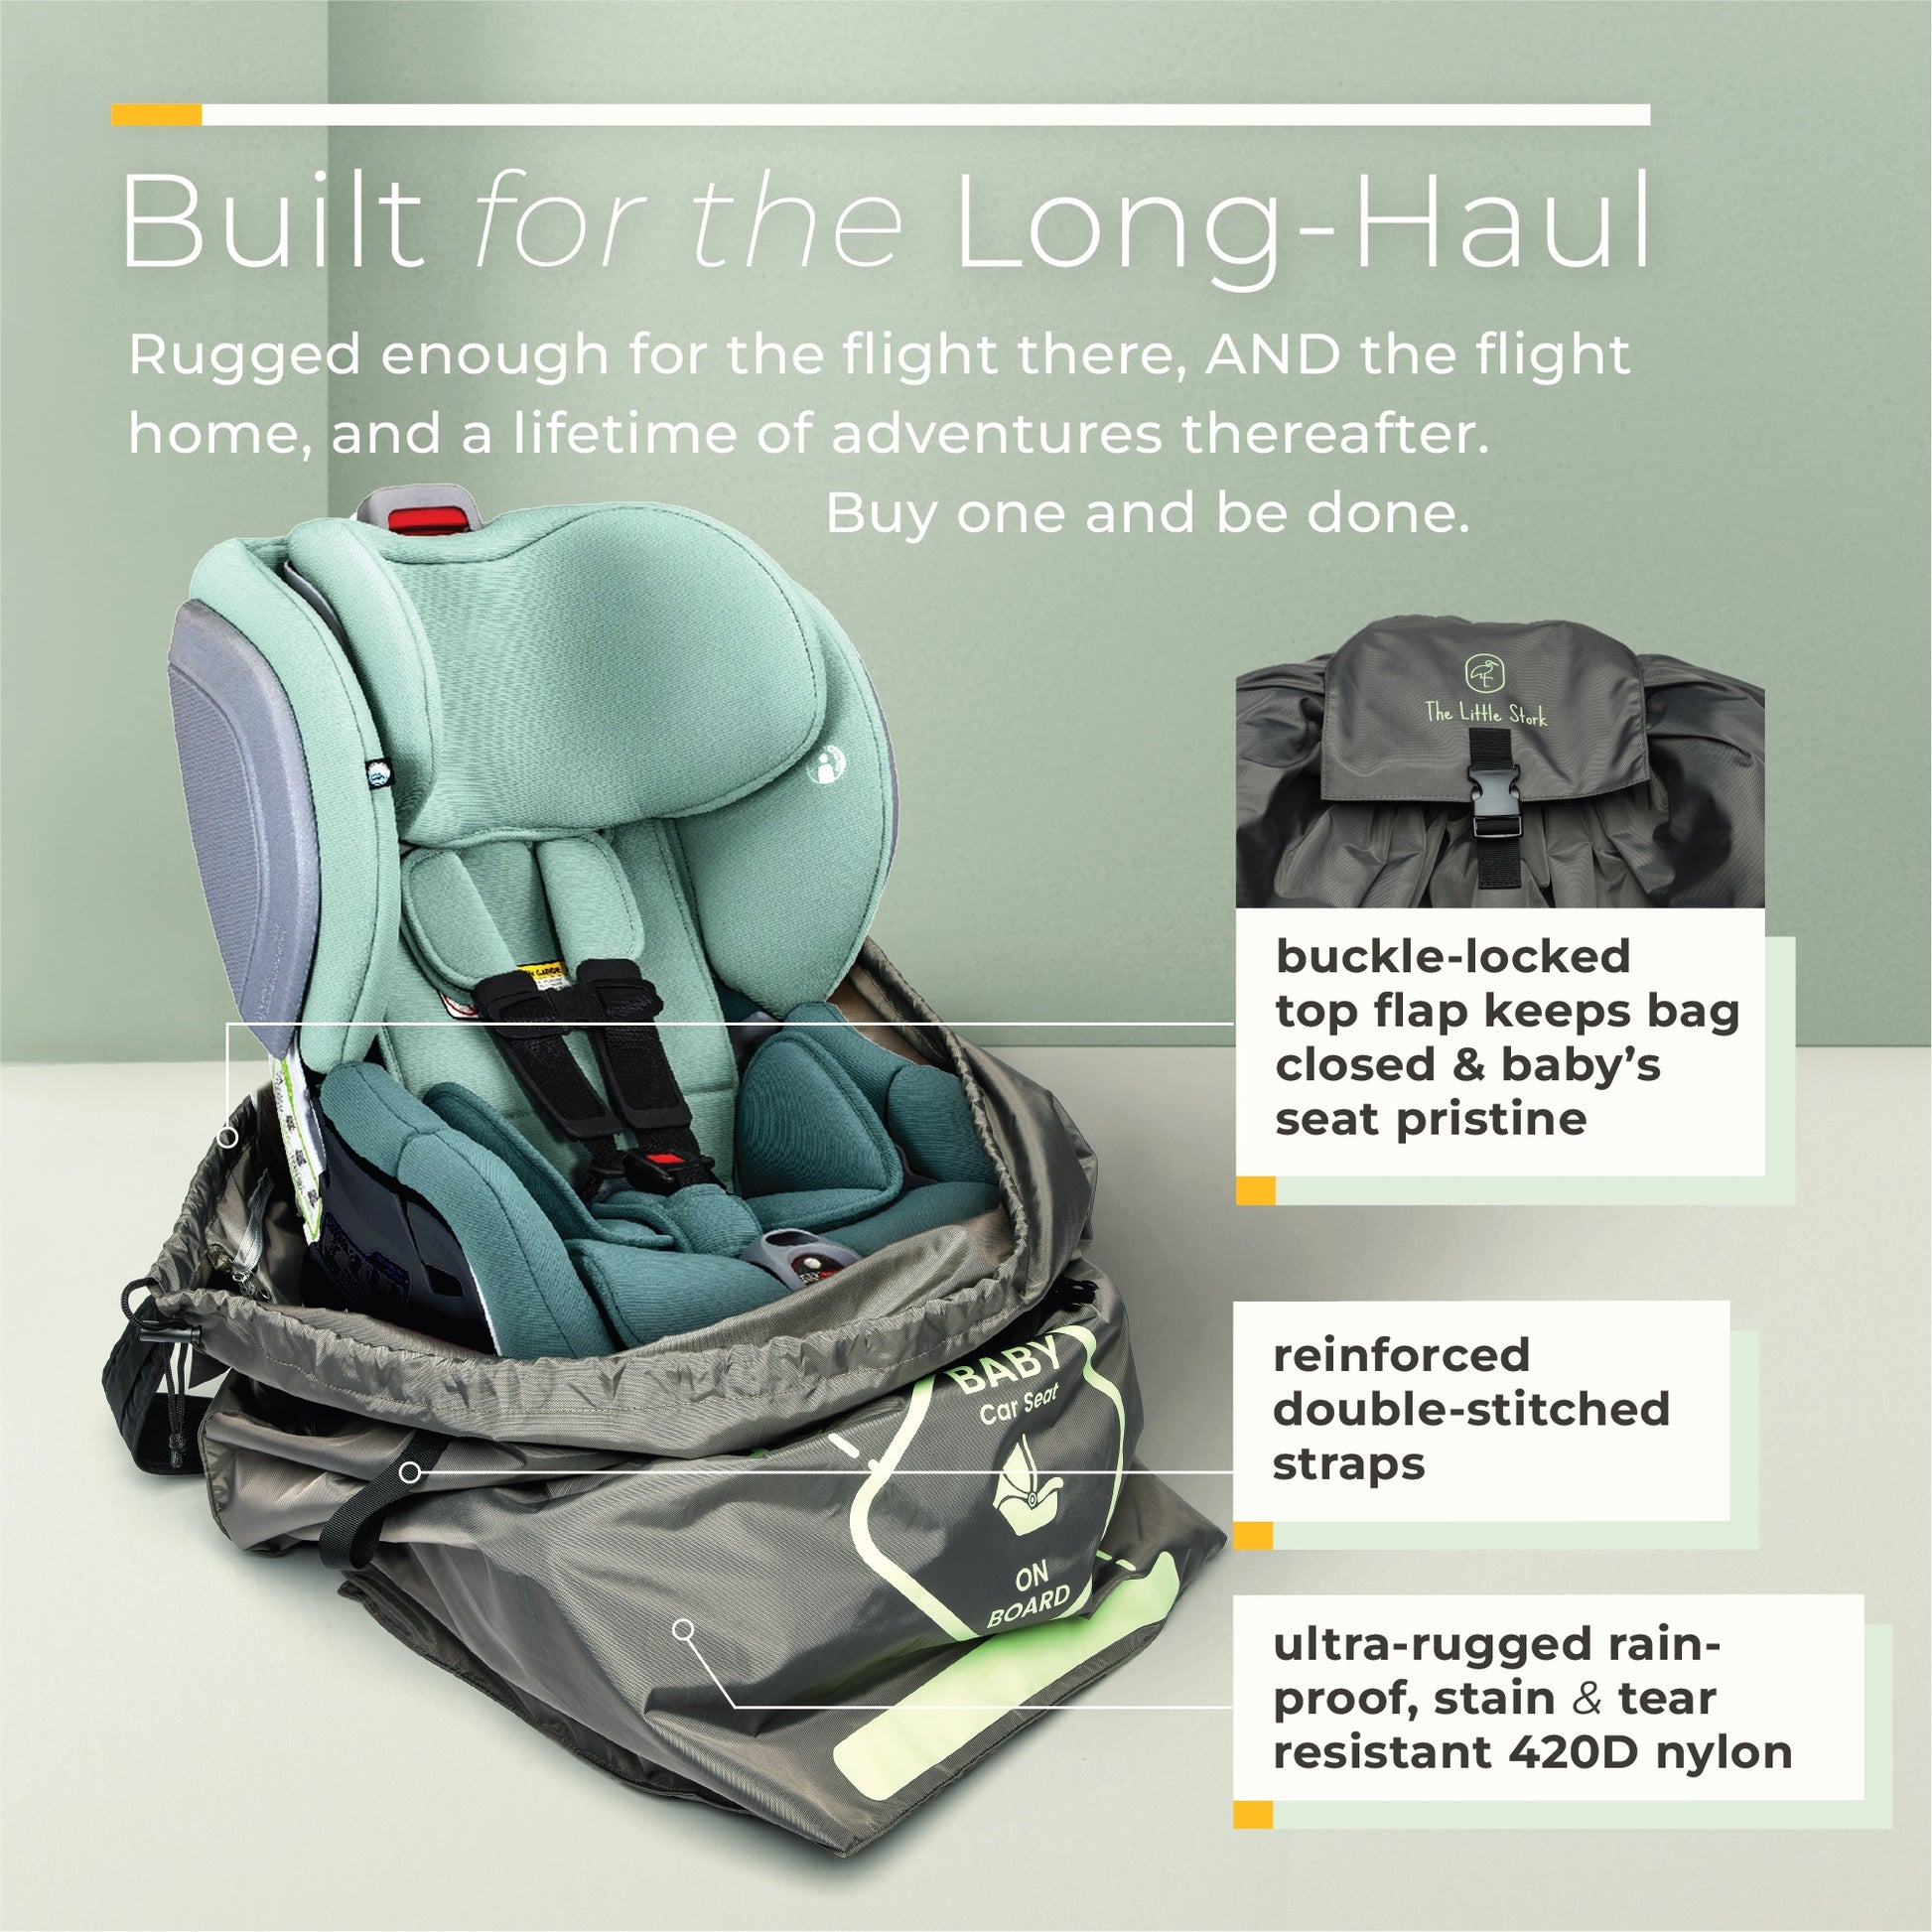 Flyte Gate Check Bag For Car Seats - by The Little Stork